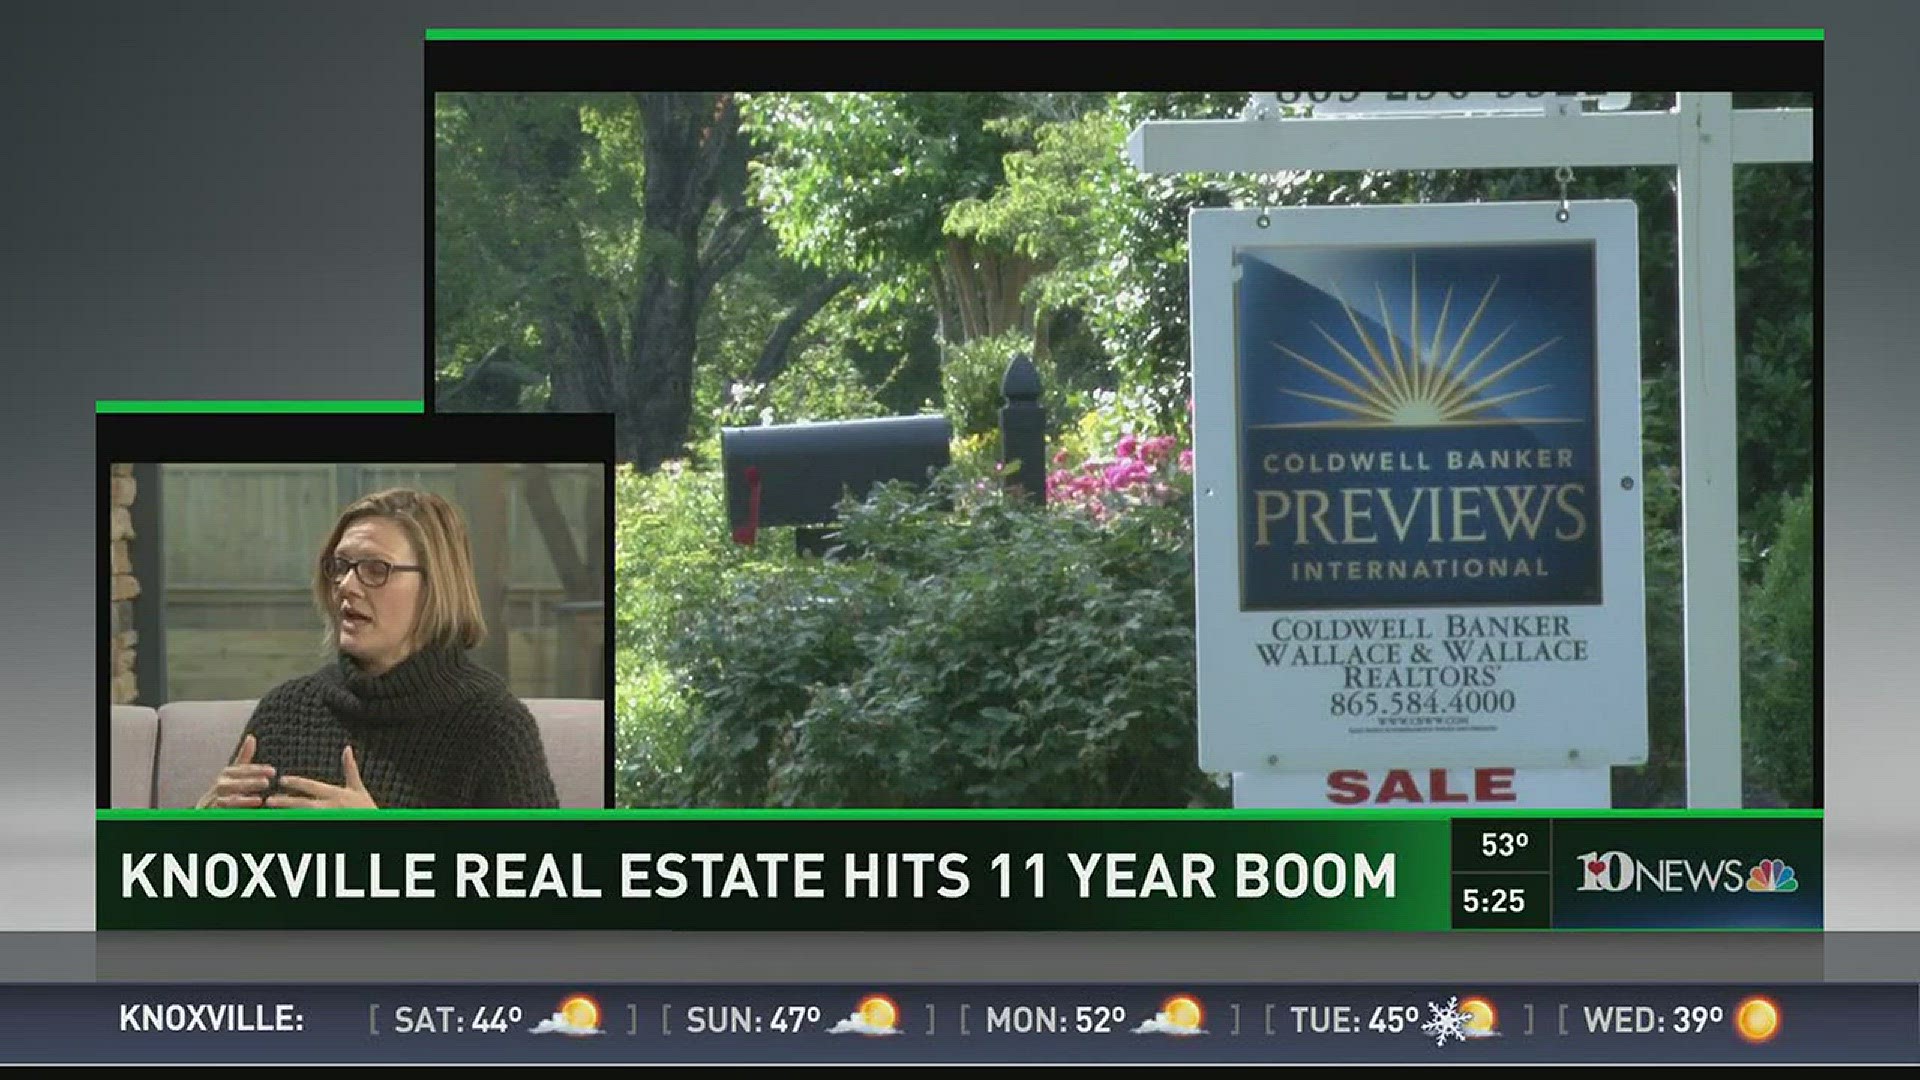 March 10, 2017: Home sales in Knoxville are at their highest level in 11 years. Interview with Suzy Trotta of Trotta Montgomery Real Estate.